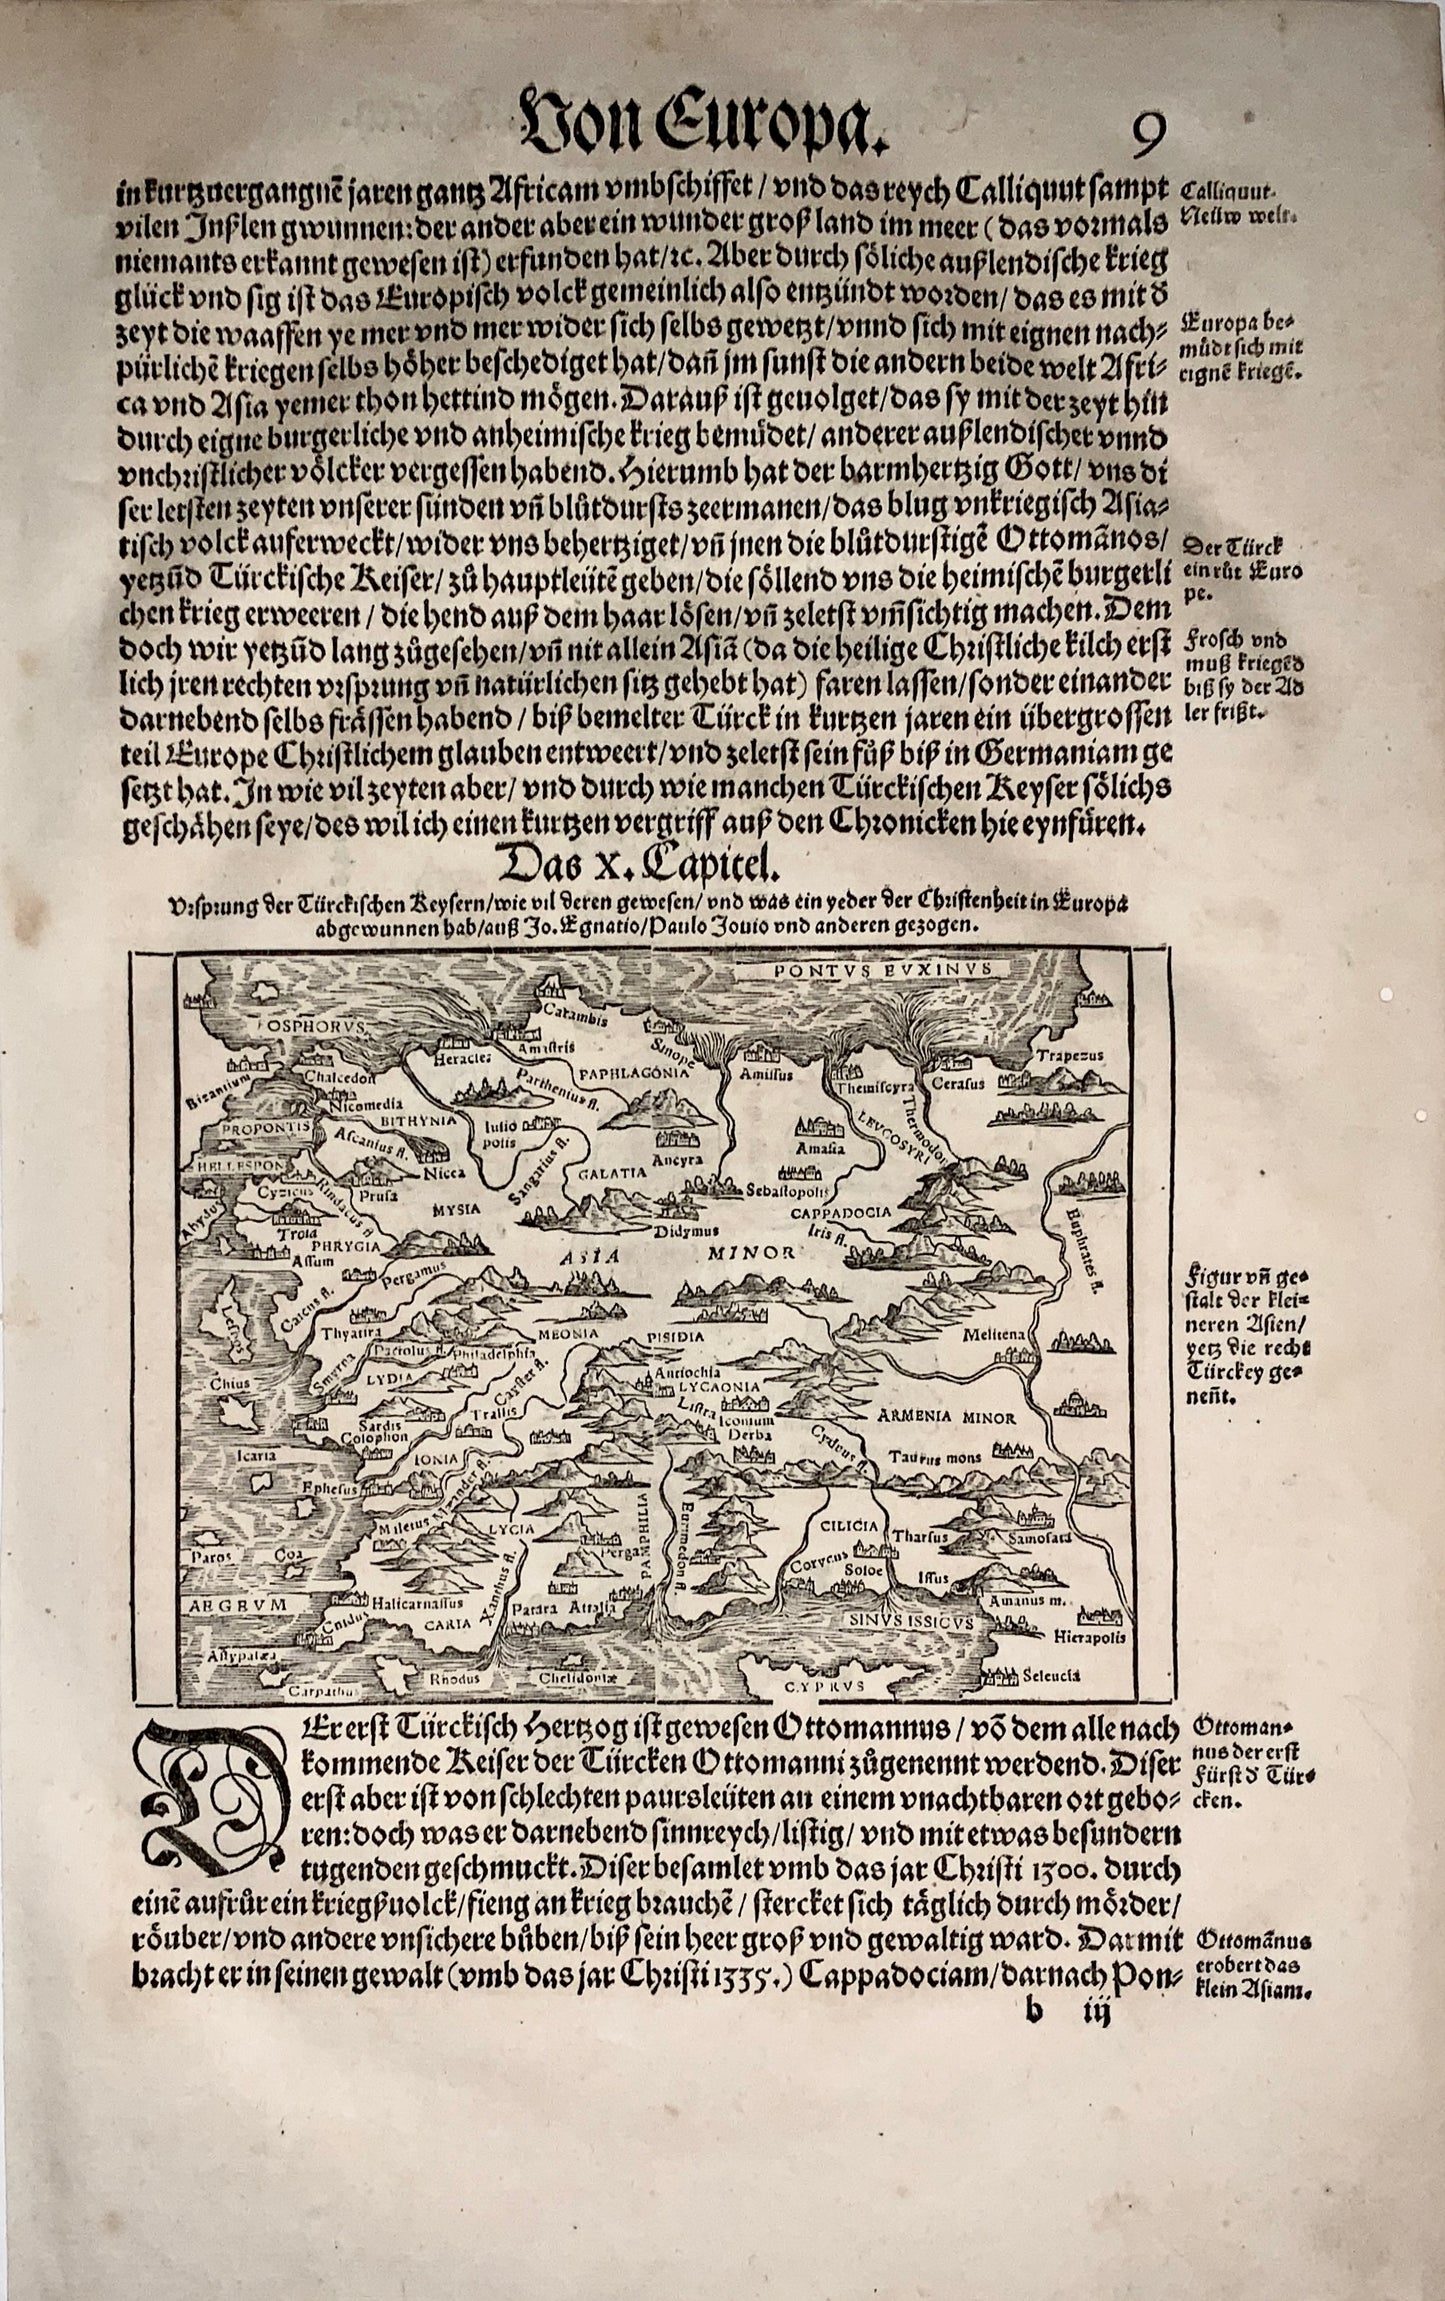 1548 Johannes Stumpf - Scarce map of Greece, Albania, Sea Monsters - First Issue